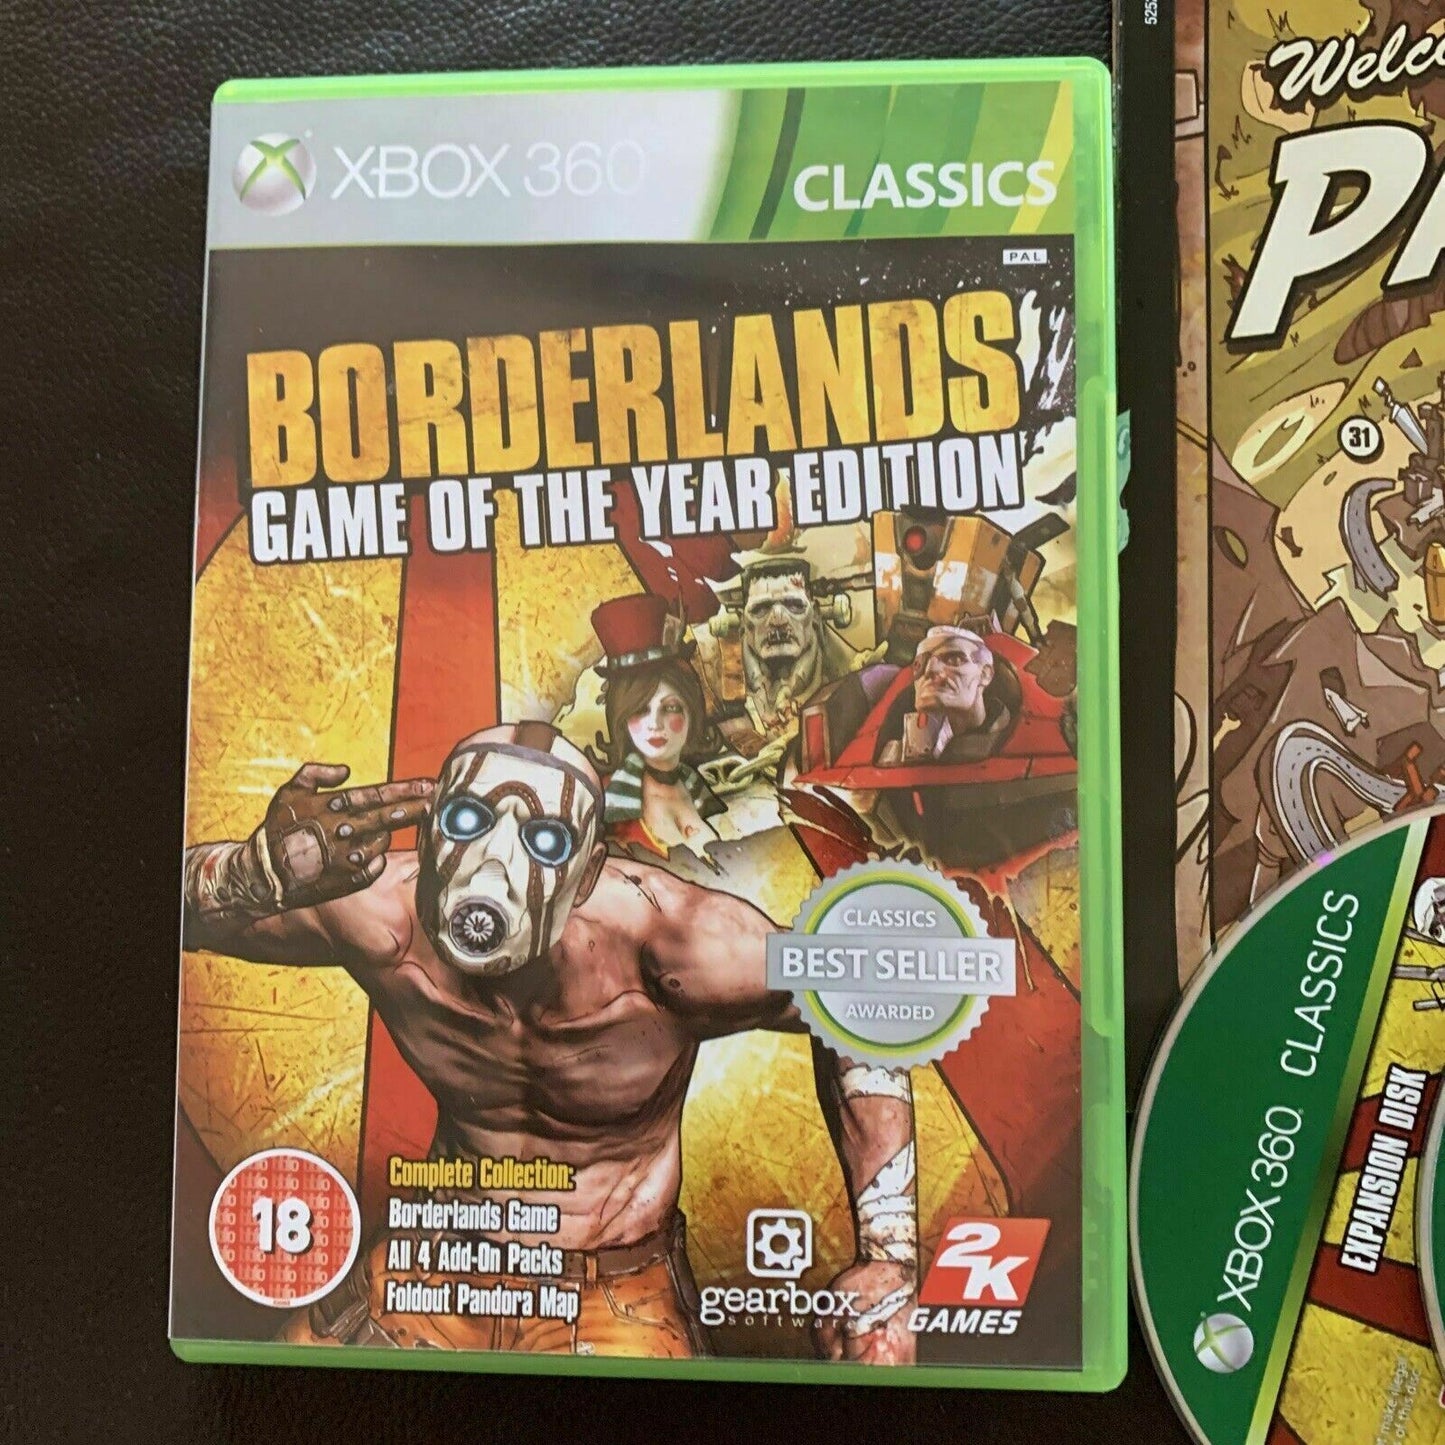 Borderlands: Game of the Year Edition Microsoft Xbox 360 PAL Game w Manual & Map